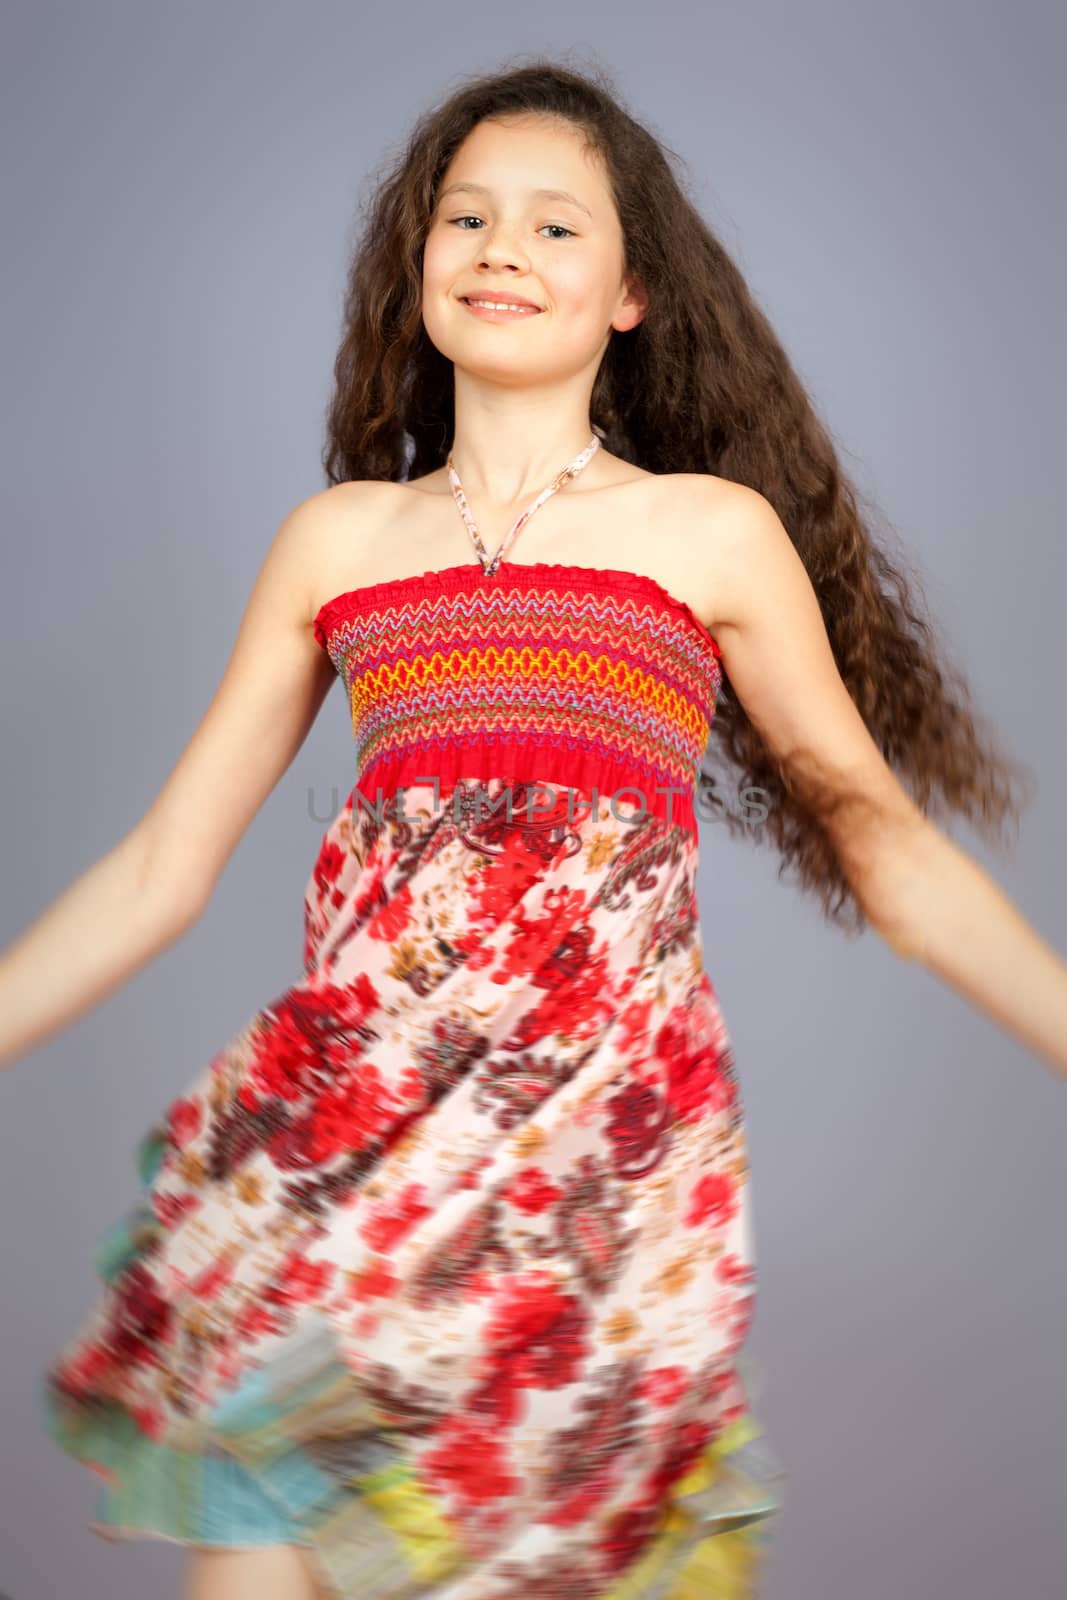 An image of a young girl dancing